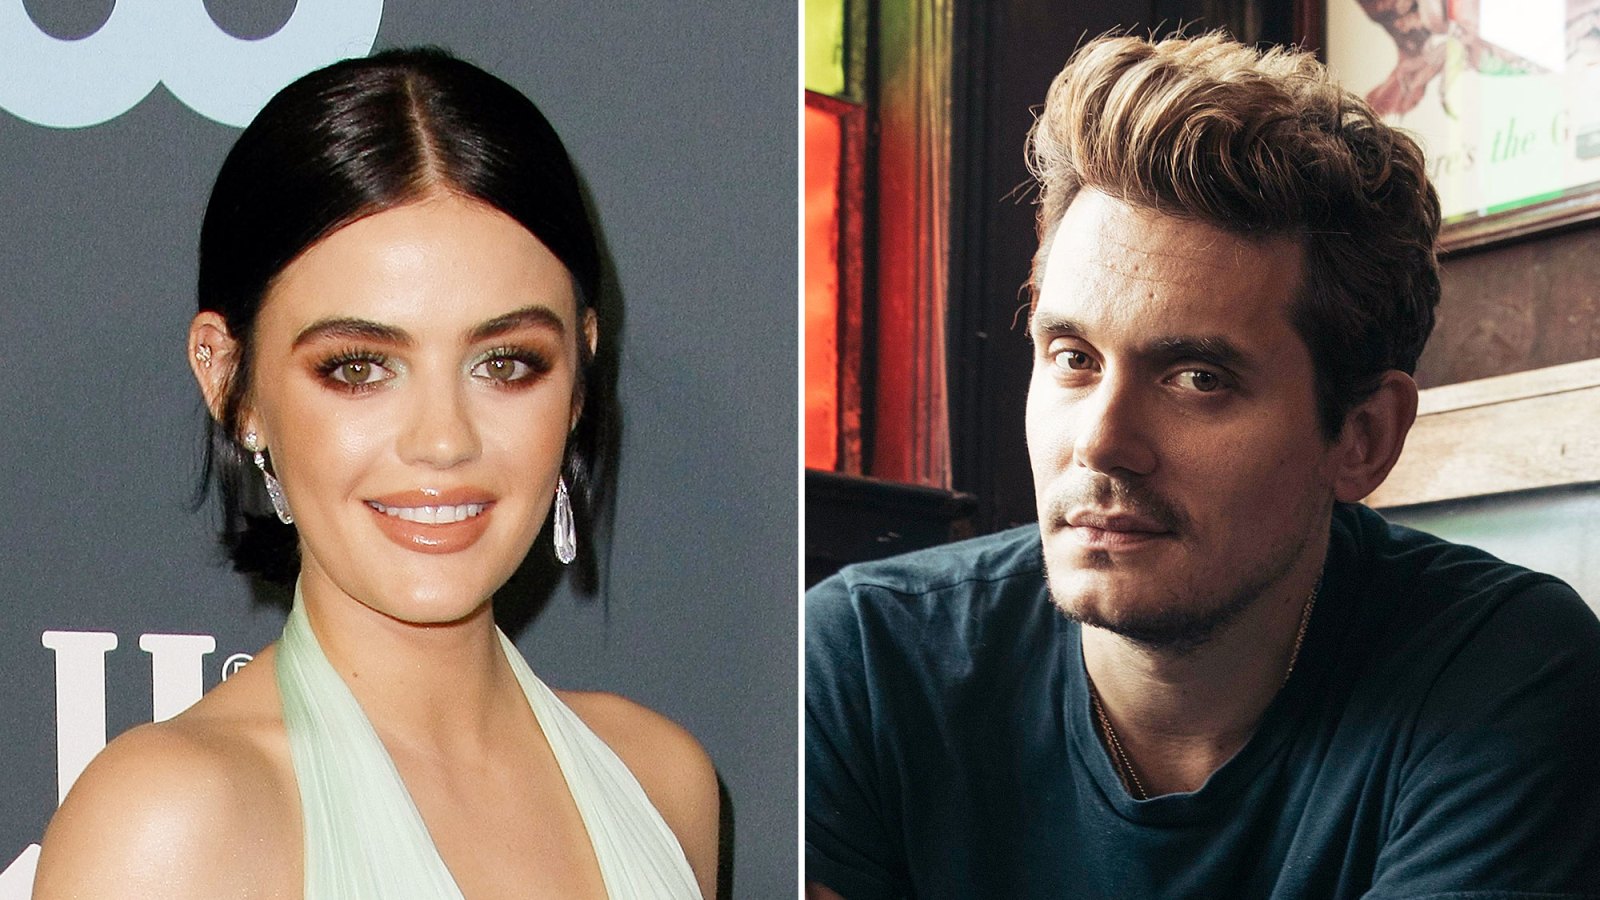 Lucy Hale Once Tried to Match With John Mayer on a Dating App